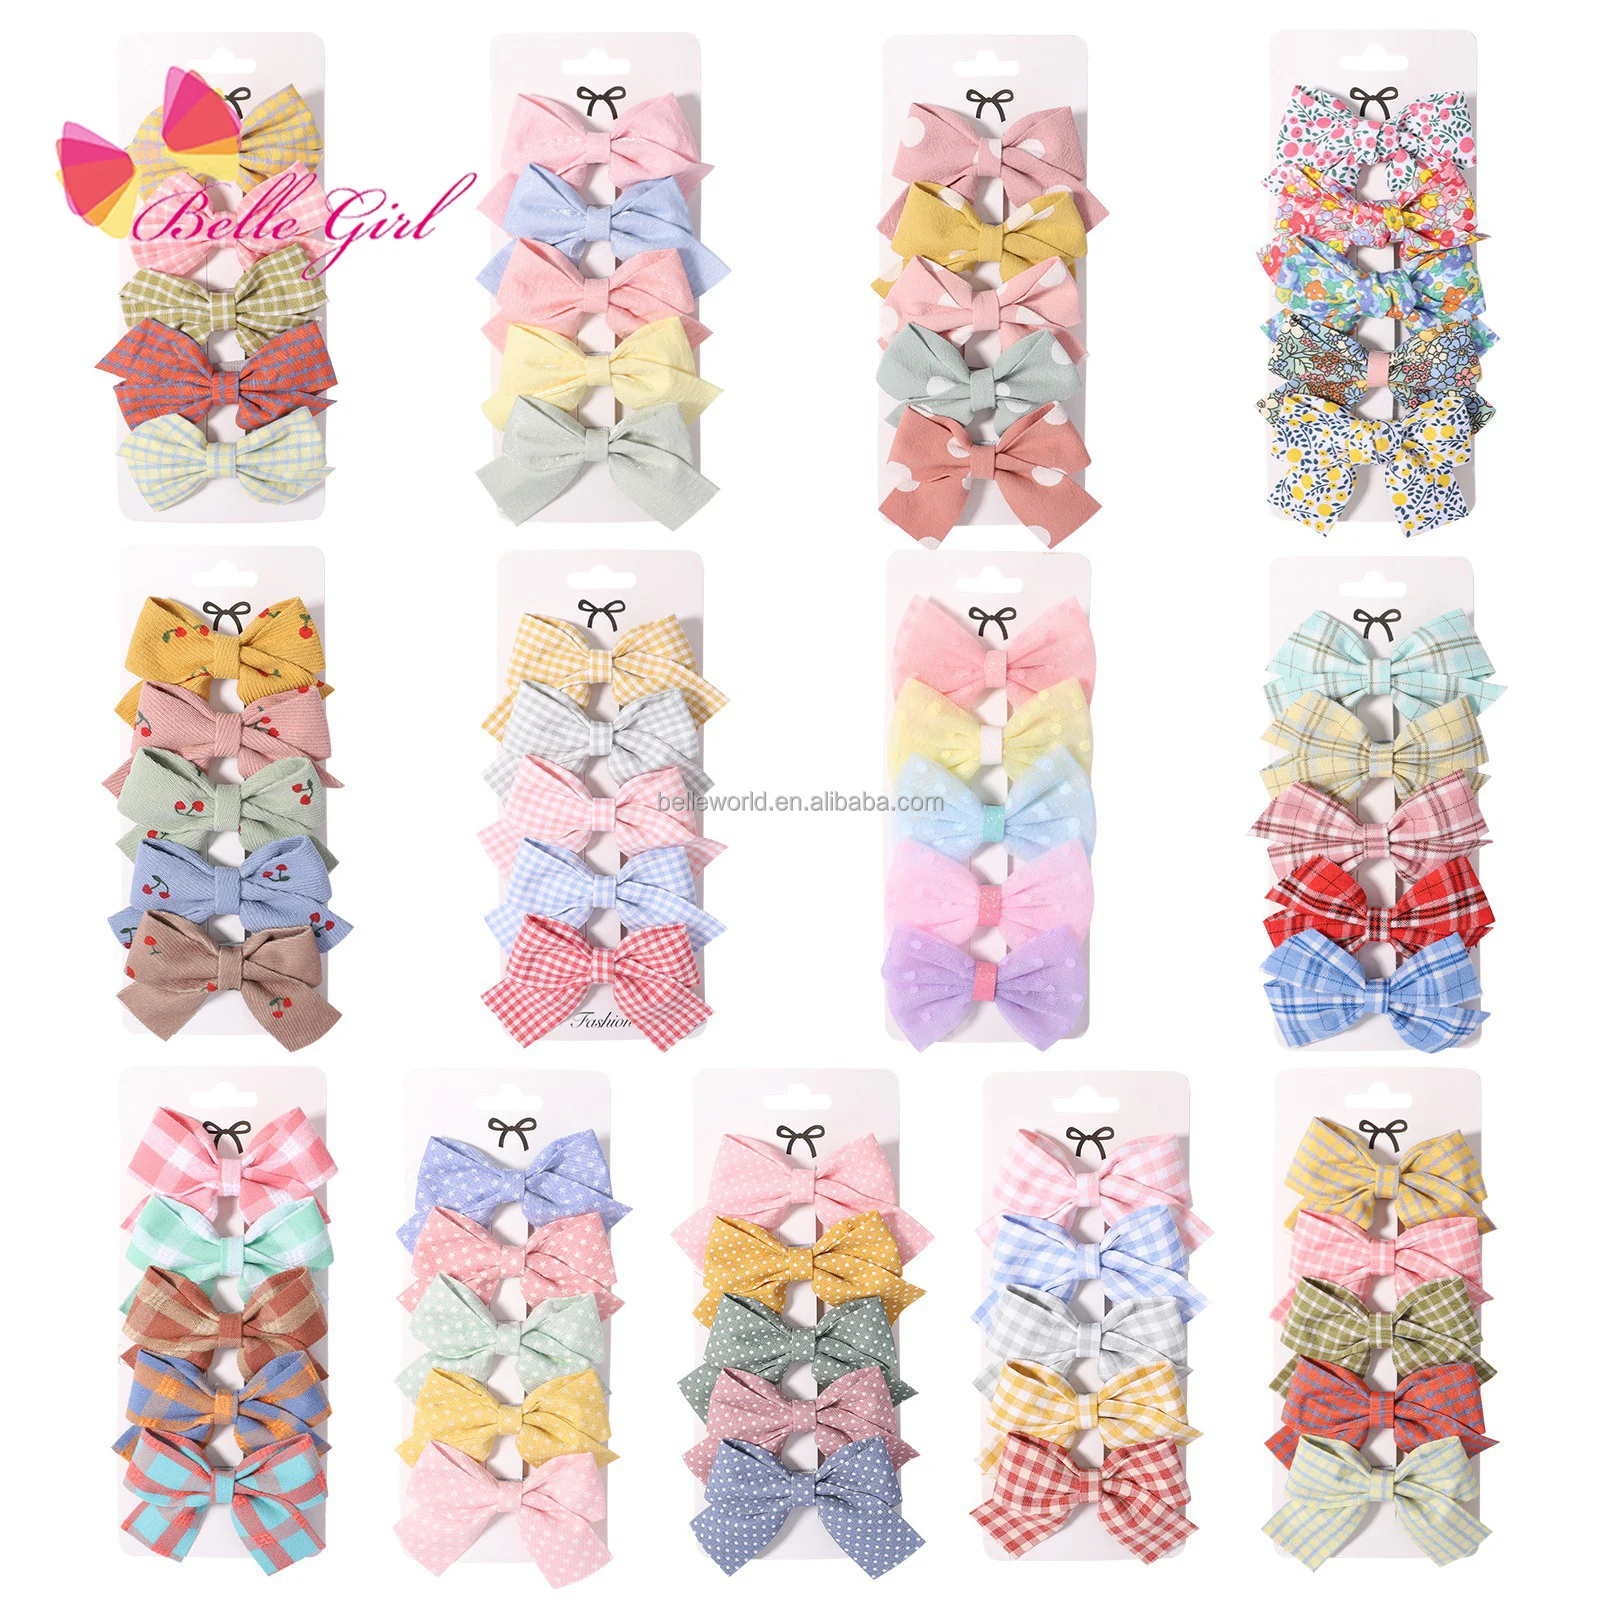 Belleworld 6colors Hair Bows Clips 5inch Unicorn Lovely Colors Kids ...